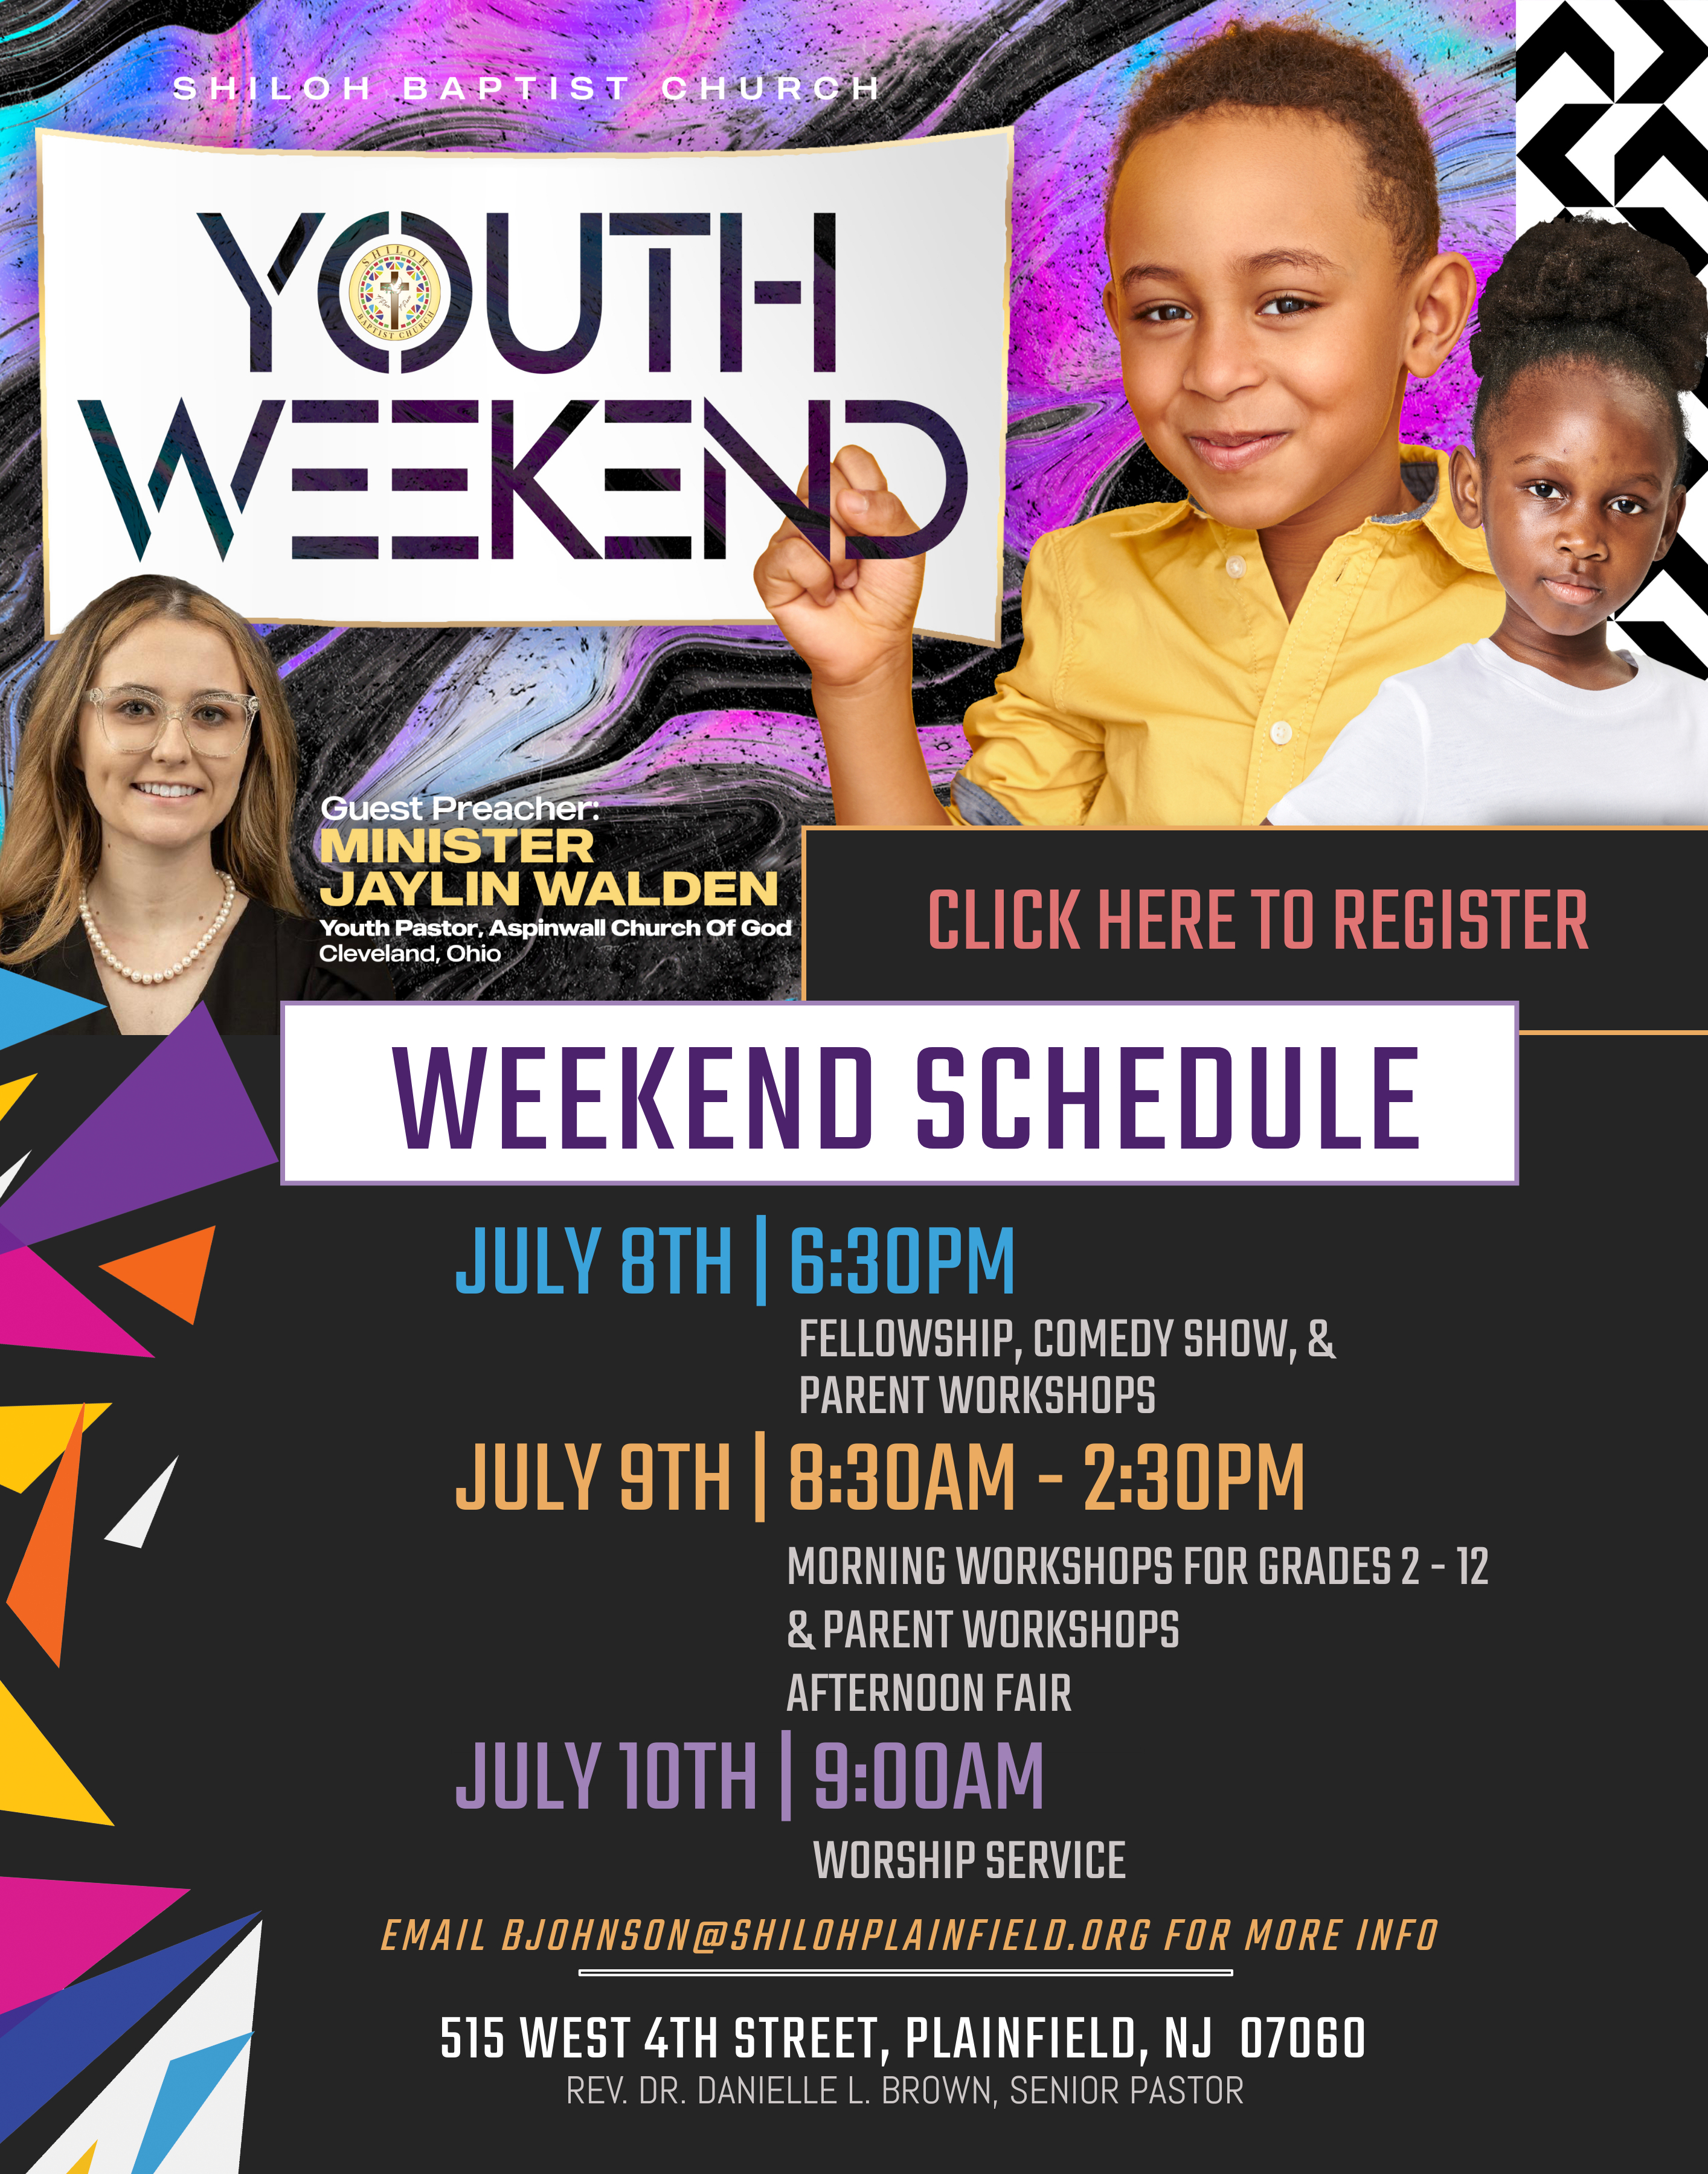 Youth weekend